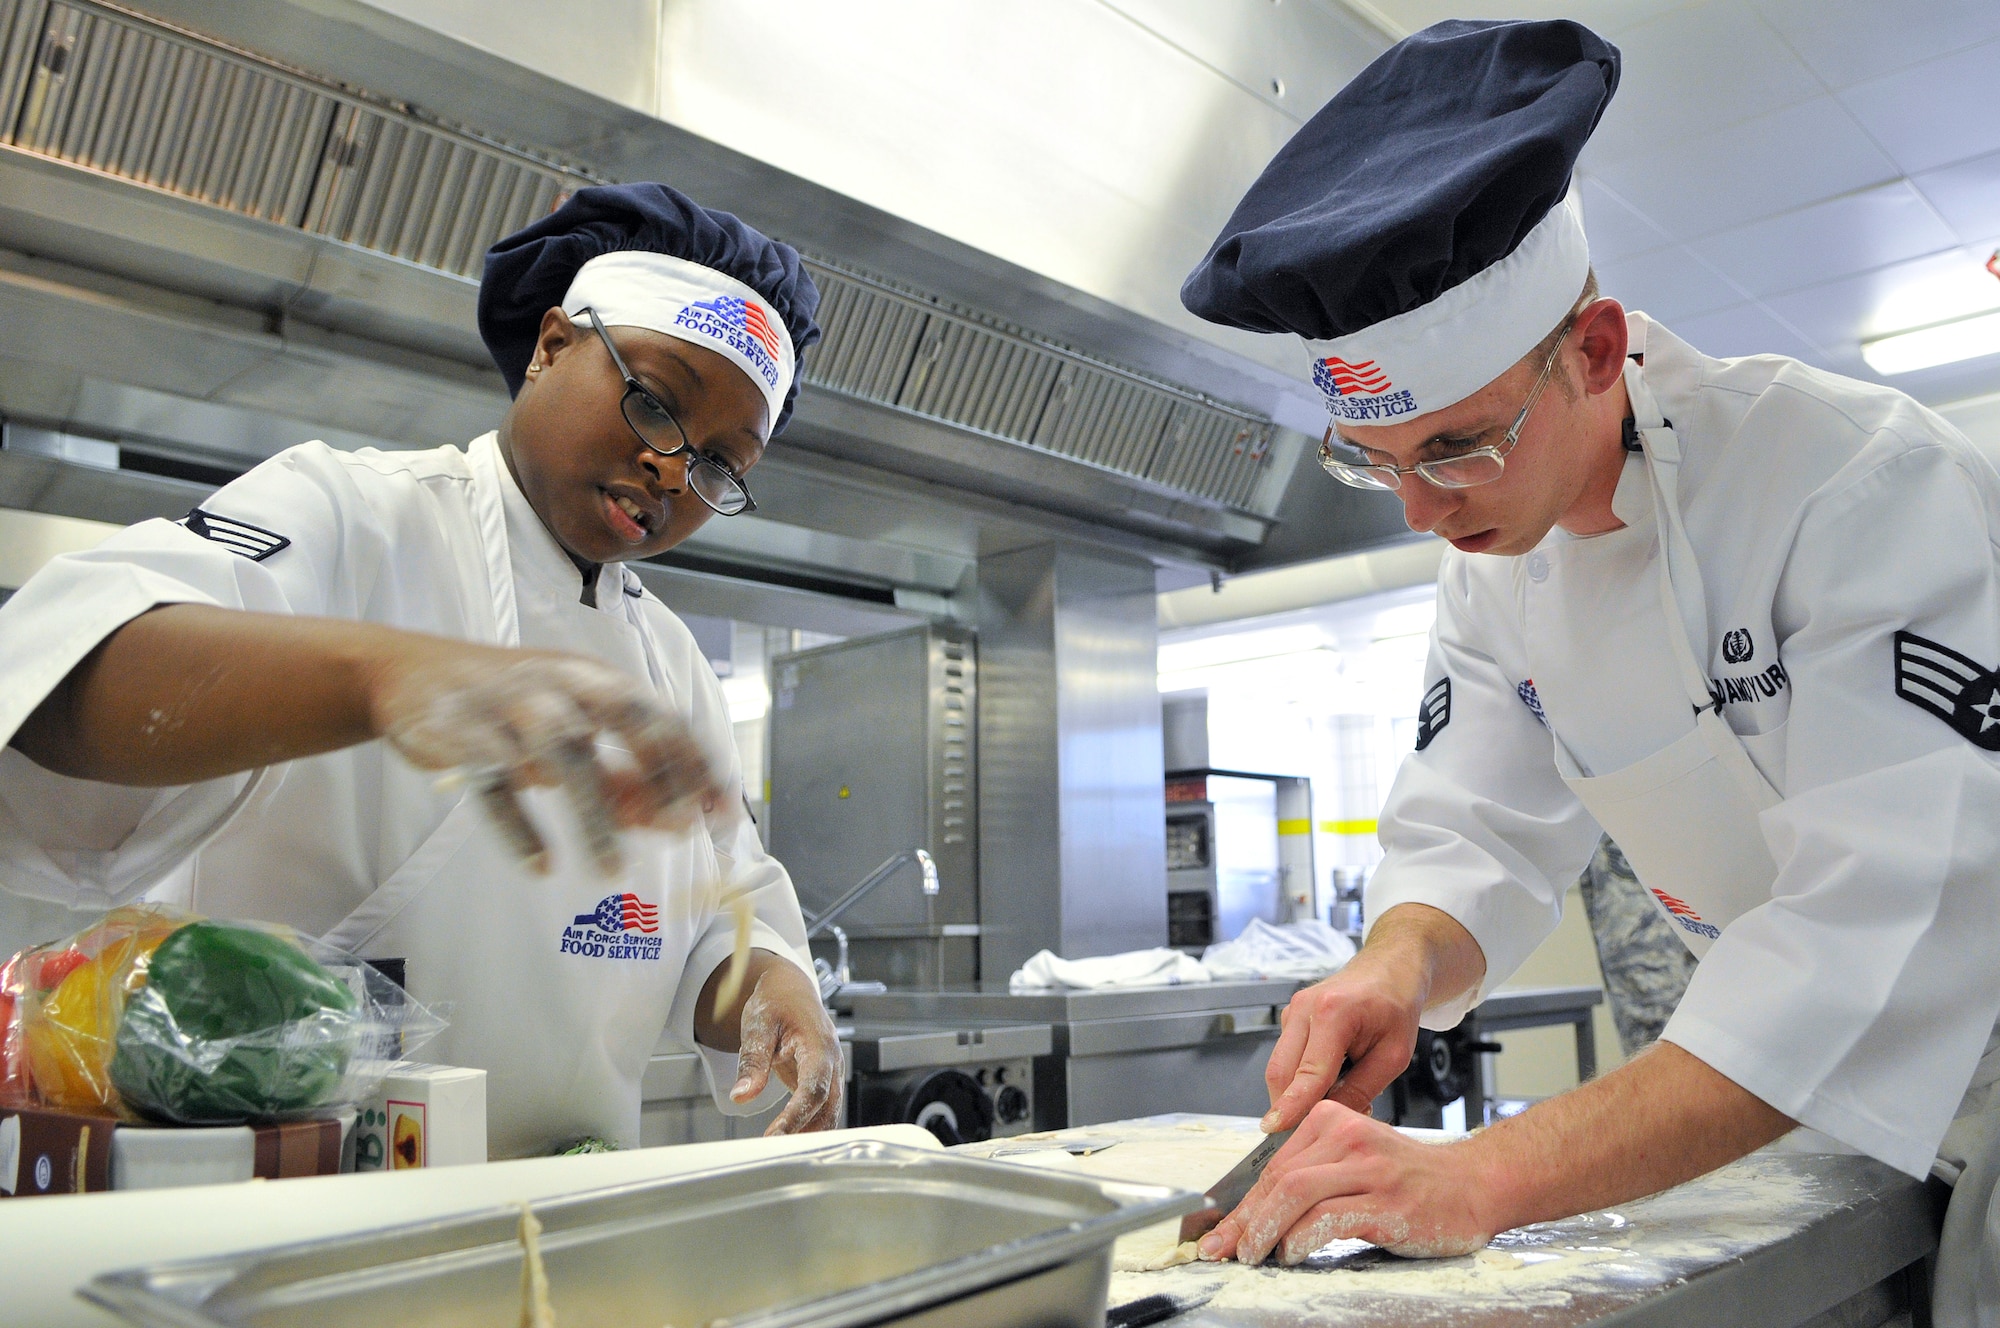 U.S. Air Force Senior Airmen Pamela Underwood and Gary Adamoyurka, 435th Services Squadron chef's, compete in the Top Chef Competition at the Lindberg Hof Dining Facility on Kapaun Air Station June 17, 2009.(U.S. Air Force photo by Staff Sgt. Stephen J. Otero)